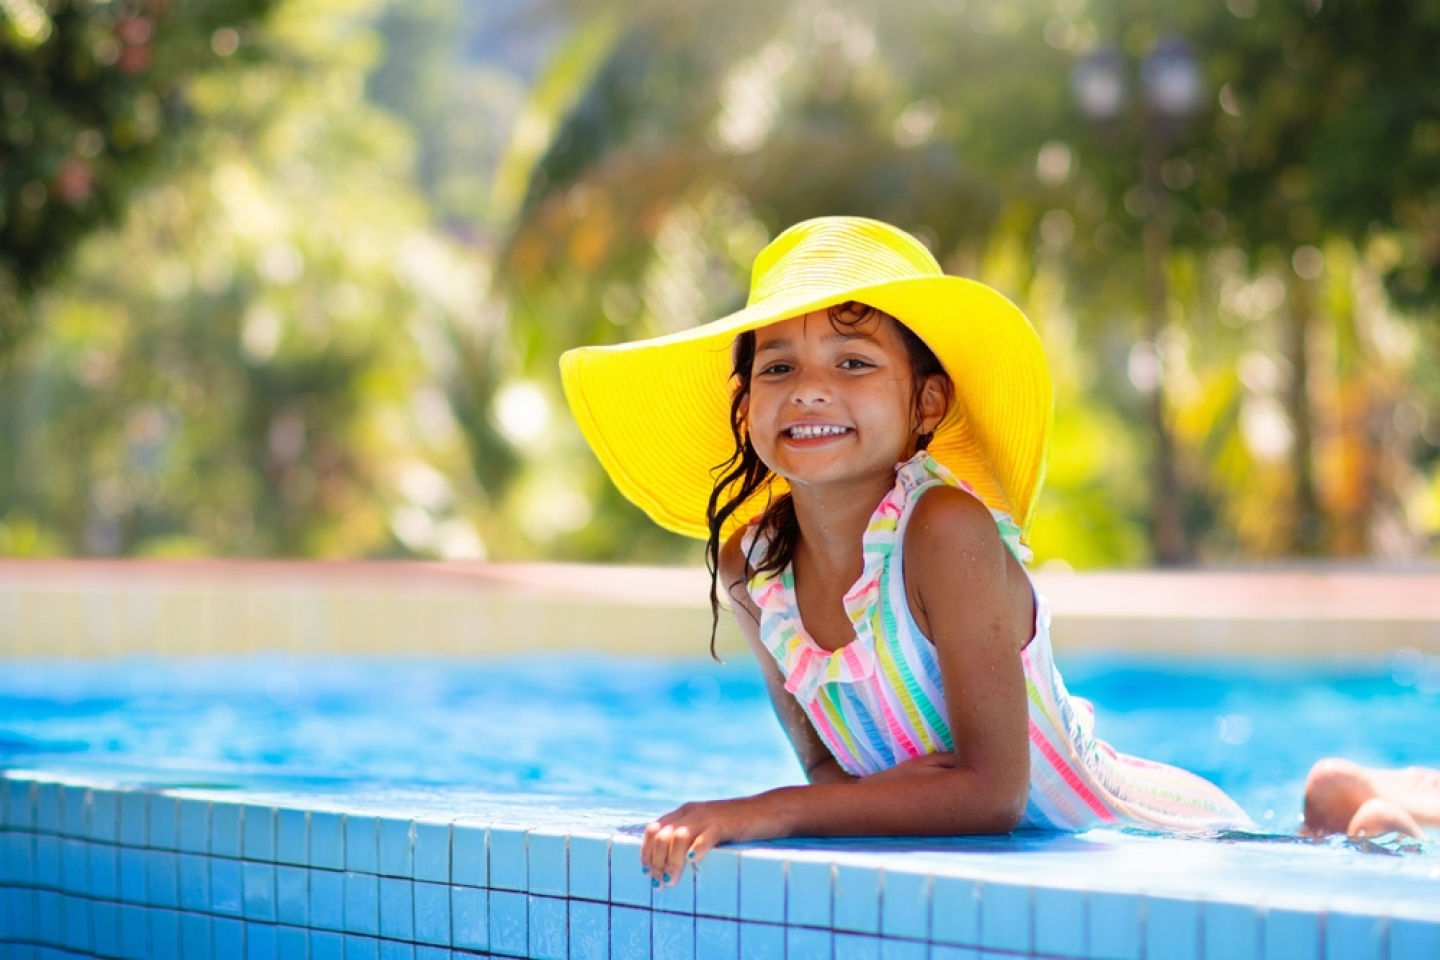 Little girl in swimming pool. Child learning to swim in outdoor pool of tropical resort. Water fun for baby and toddler. Travel with kids. Summer family vacation. Beach holiday with young kid.